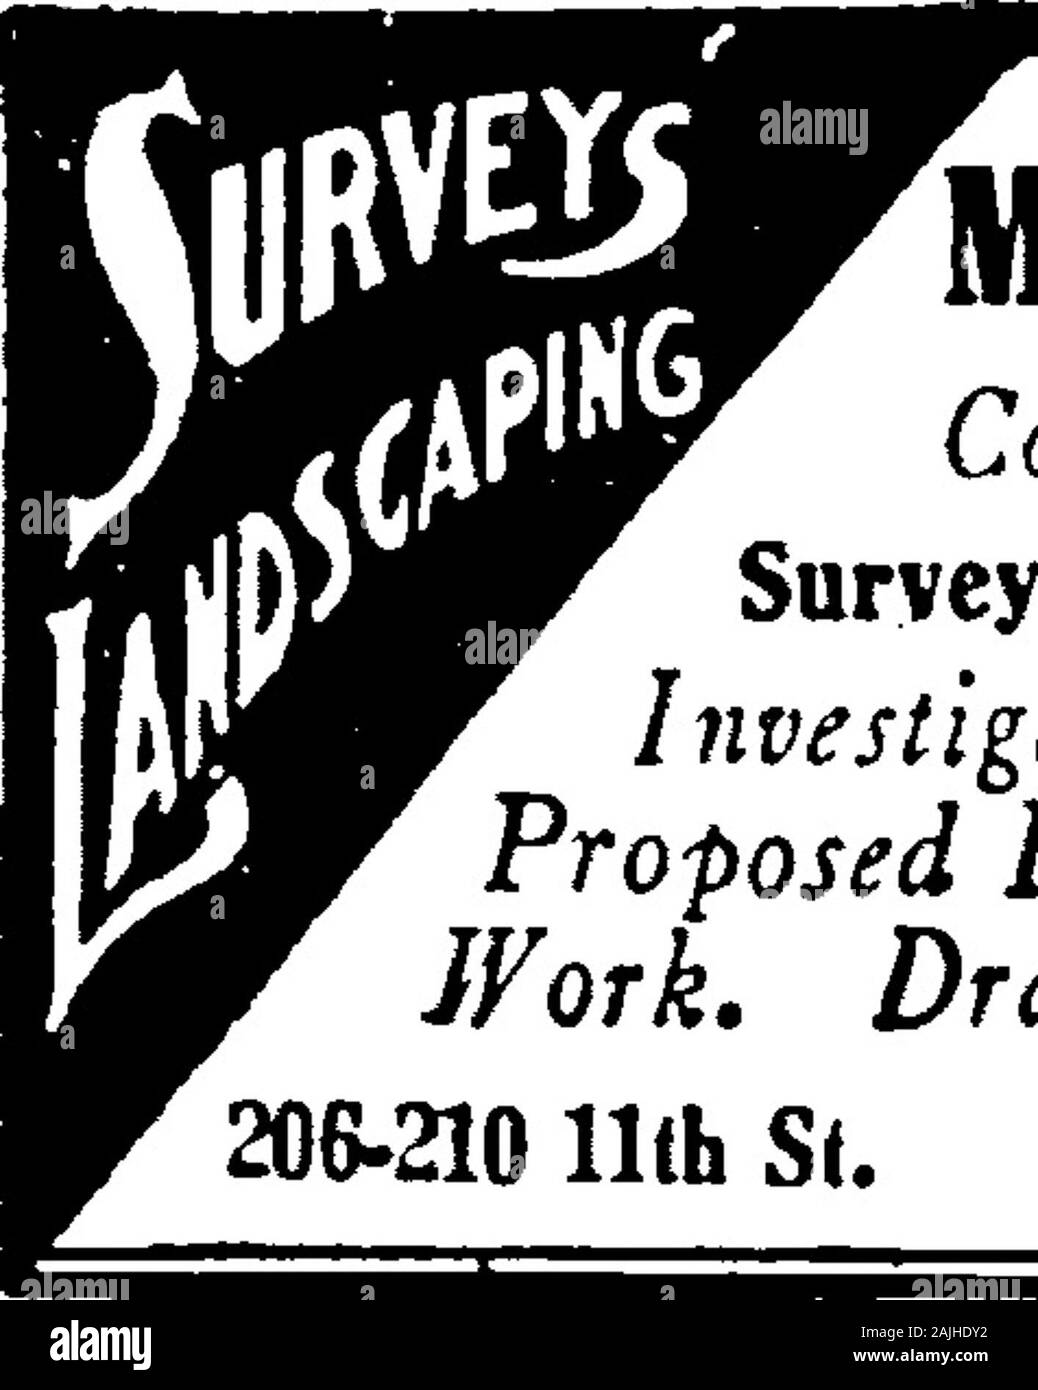 1921 Des Moines and Polk County, Iowa, City Directory . MOVING AND SHIPPING Mulberri and linth Streets Phone, Walnat 47« L. POLK & CO.S NYL O o 06 iC CO 00 c CO e o ^ 1? g »3 C03 W.I 1^ a 0)^ efa PQ •a na o3 i 0«8 : tsoz &gt; nuin^Sd. Monroe L. Patzig Consulting EngineerSurveys, Designs, Specifications Investigation and Reports onProposed Projects and ExistingWork. Drainage Engineering, 206-210 11th St. Plione Walnut 3440 1 iNunn Grace L elk The Armand Co l)ds 1535 28thXiinii Ira R mtrmii D M City Ry Co res 750 24thNuiin Jolin H slsmii G R Kinney Co (Inc) res 15:i5 28thNunn Lloyd B eng C M .t Stock Photo